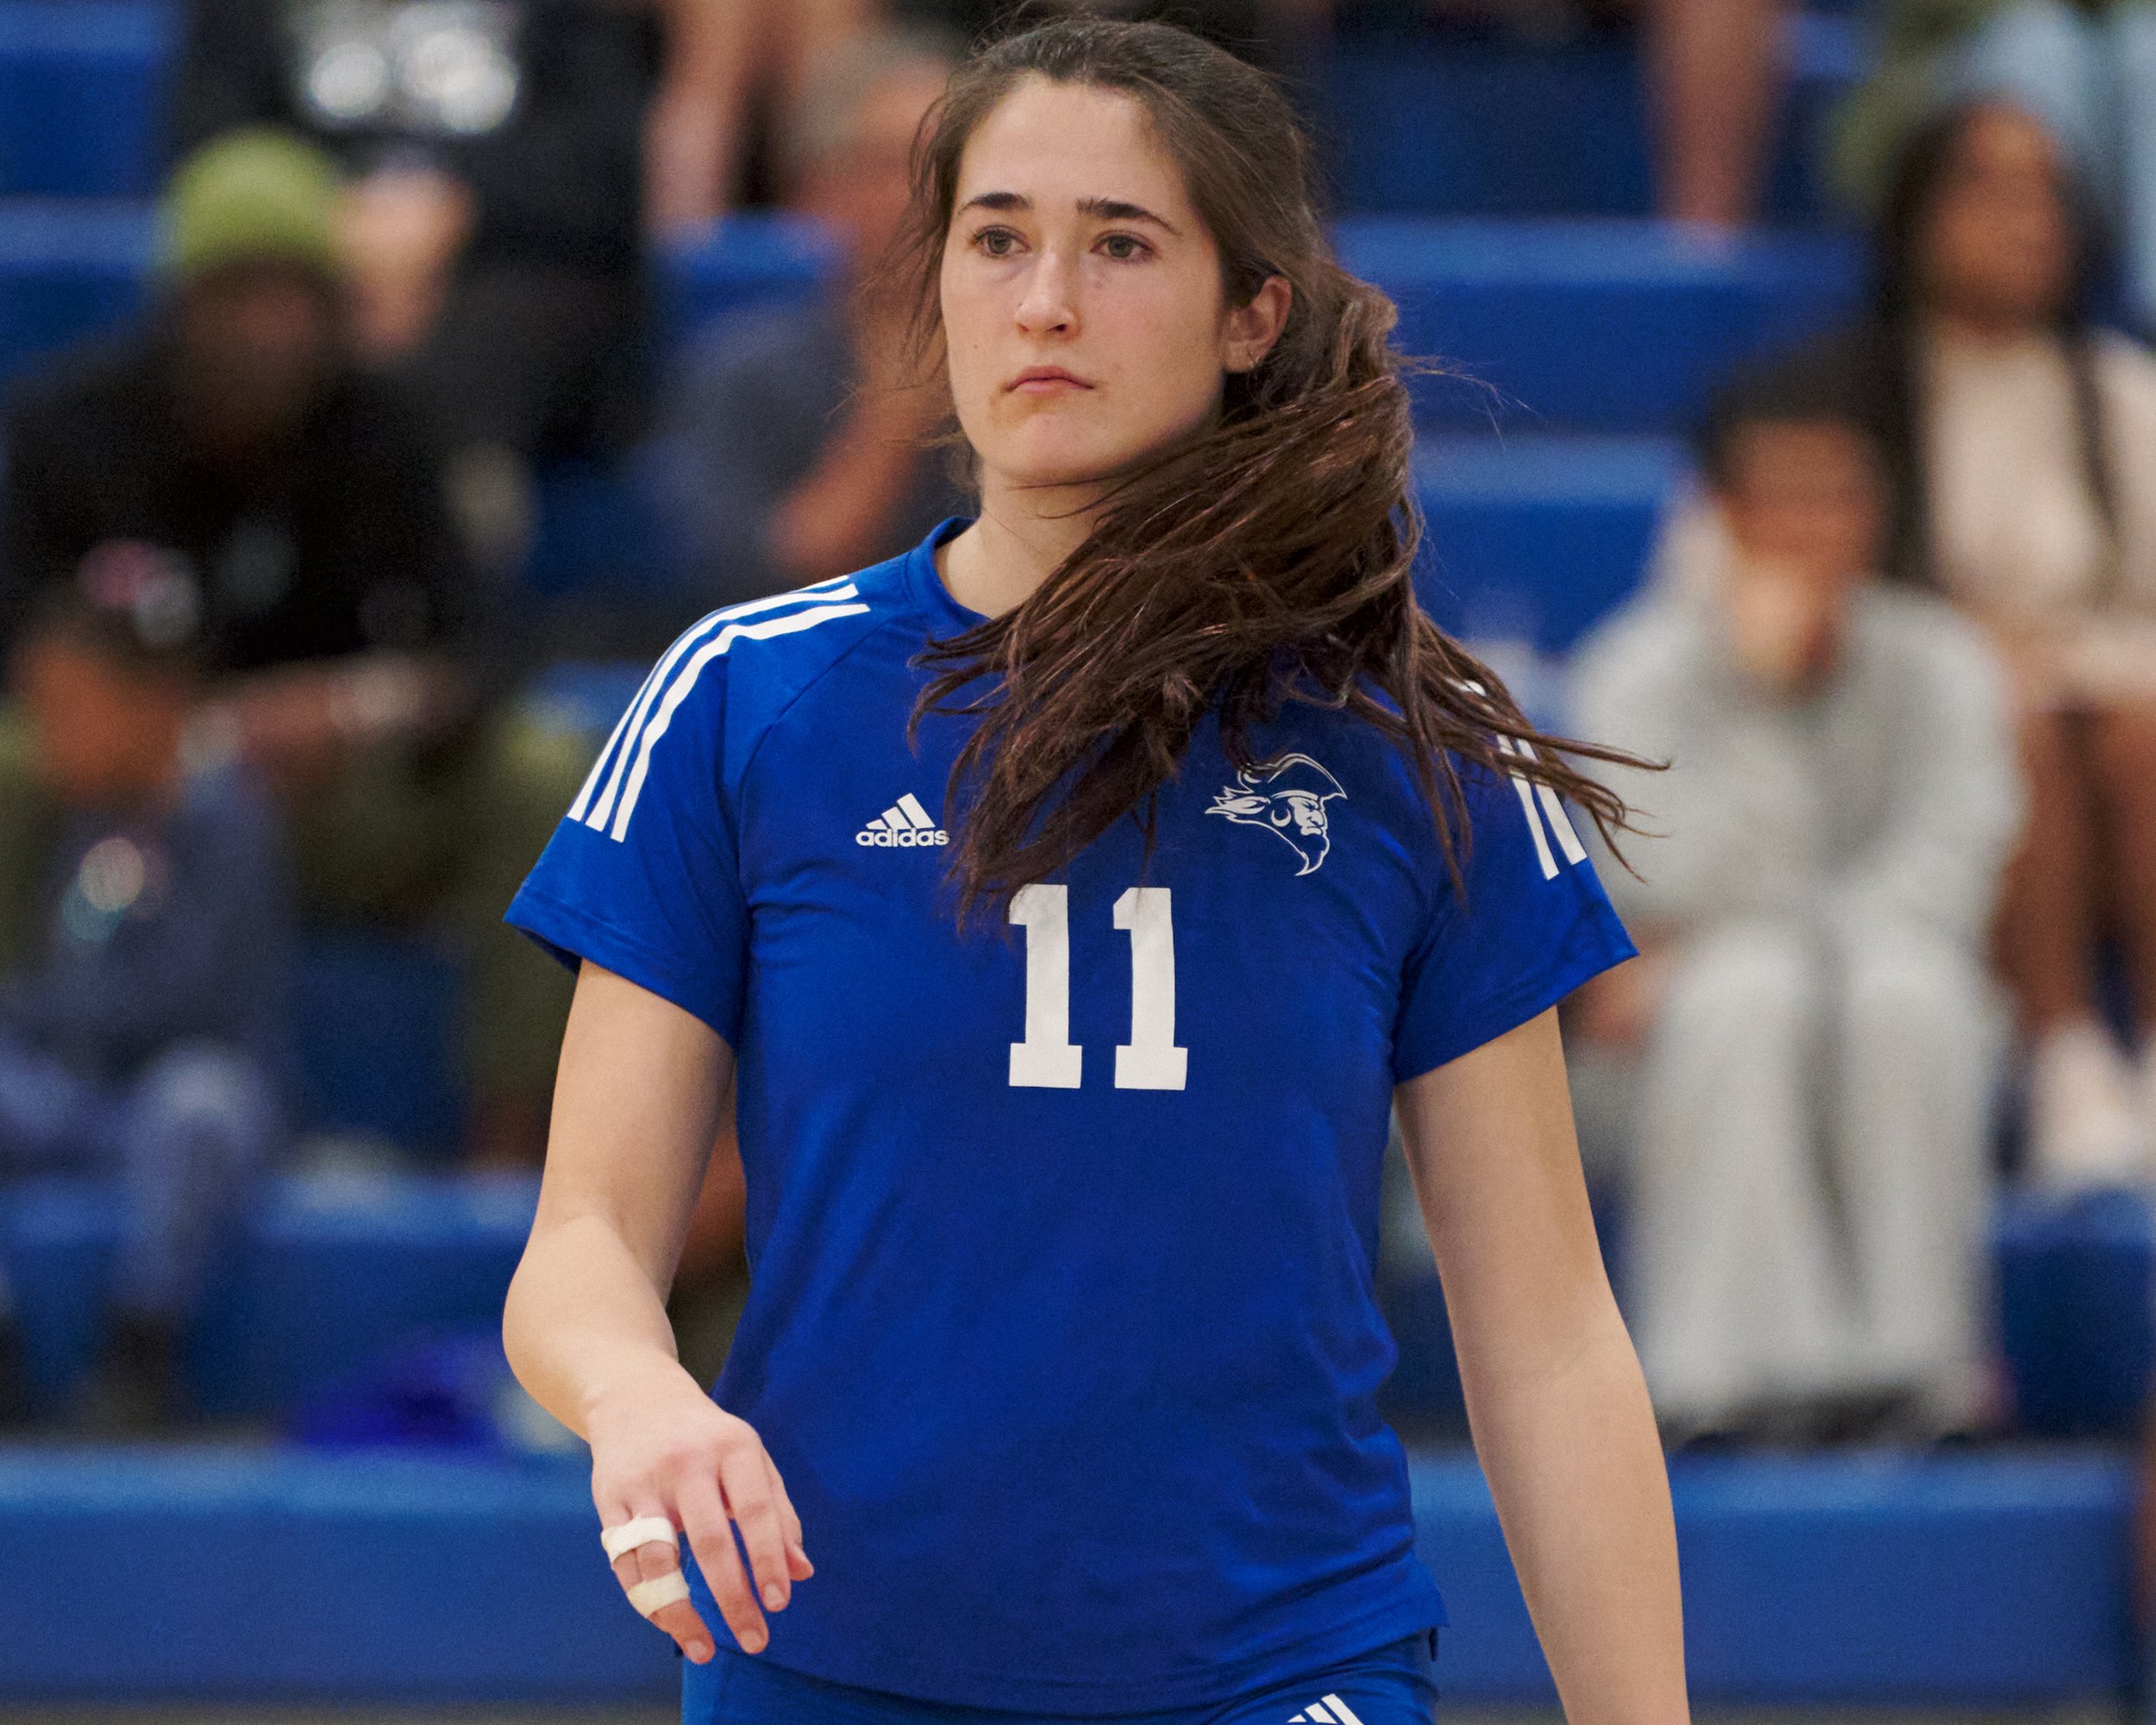  Santa Monica College Corsairs' Maiella Riva during the women's volleyball match against the College of the Canyons Cougars on Friday, Oct. 28, 2022, at SMC Gym in Santa Monica, Calif. The Corsairs lost 1-3. (Nicholas McCall | The Corsair) 